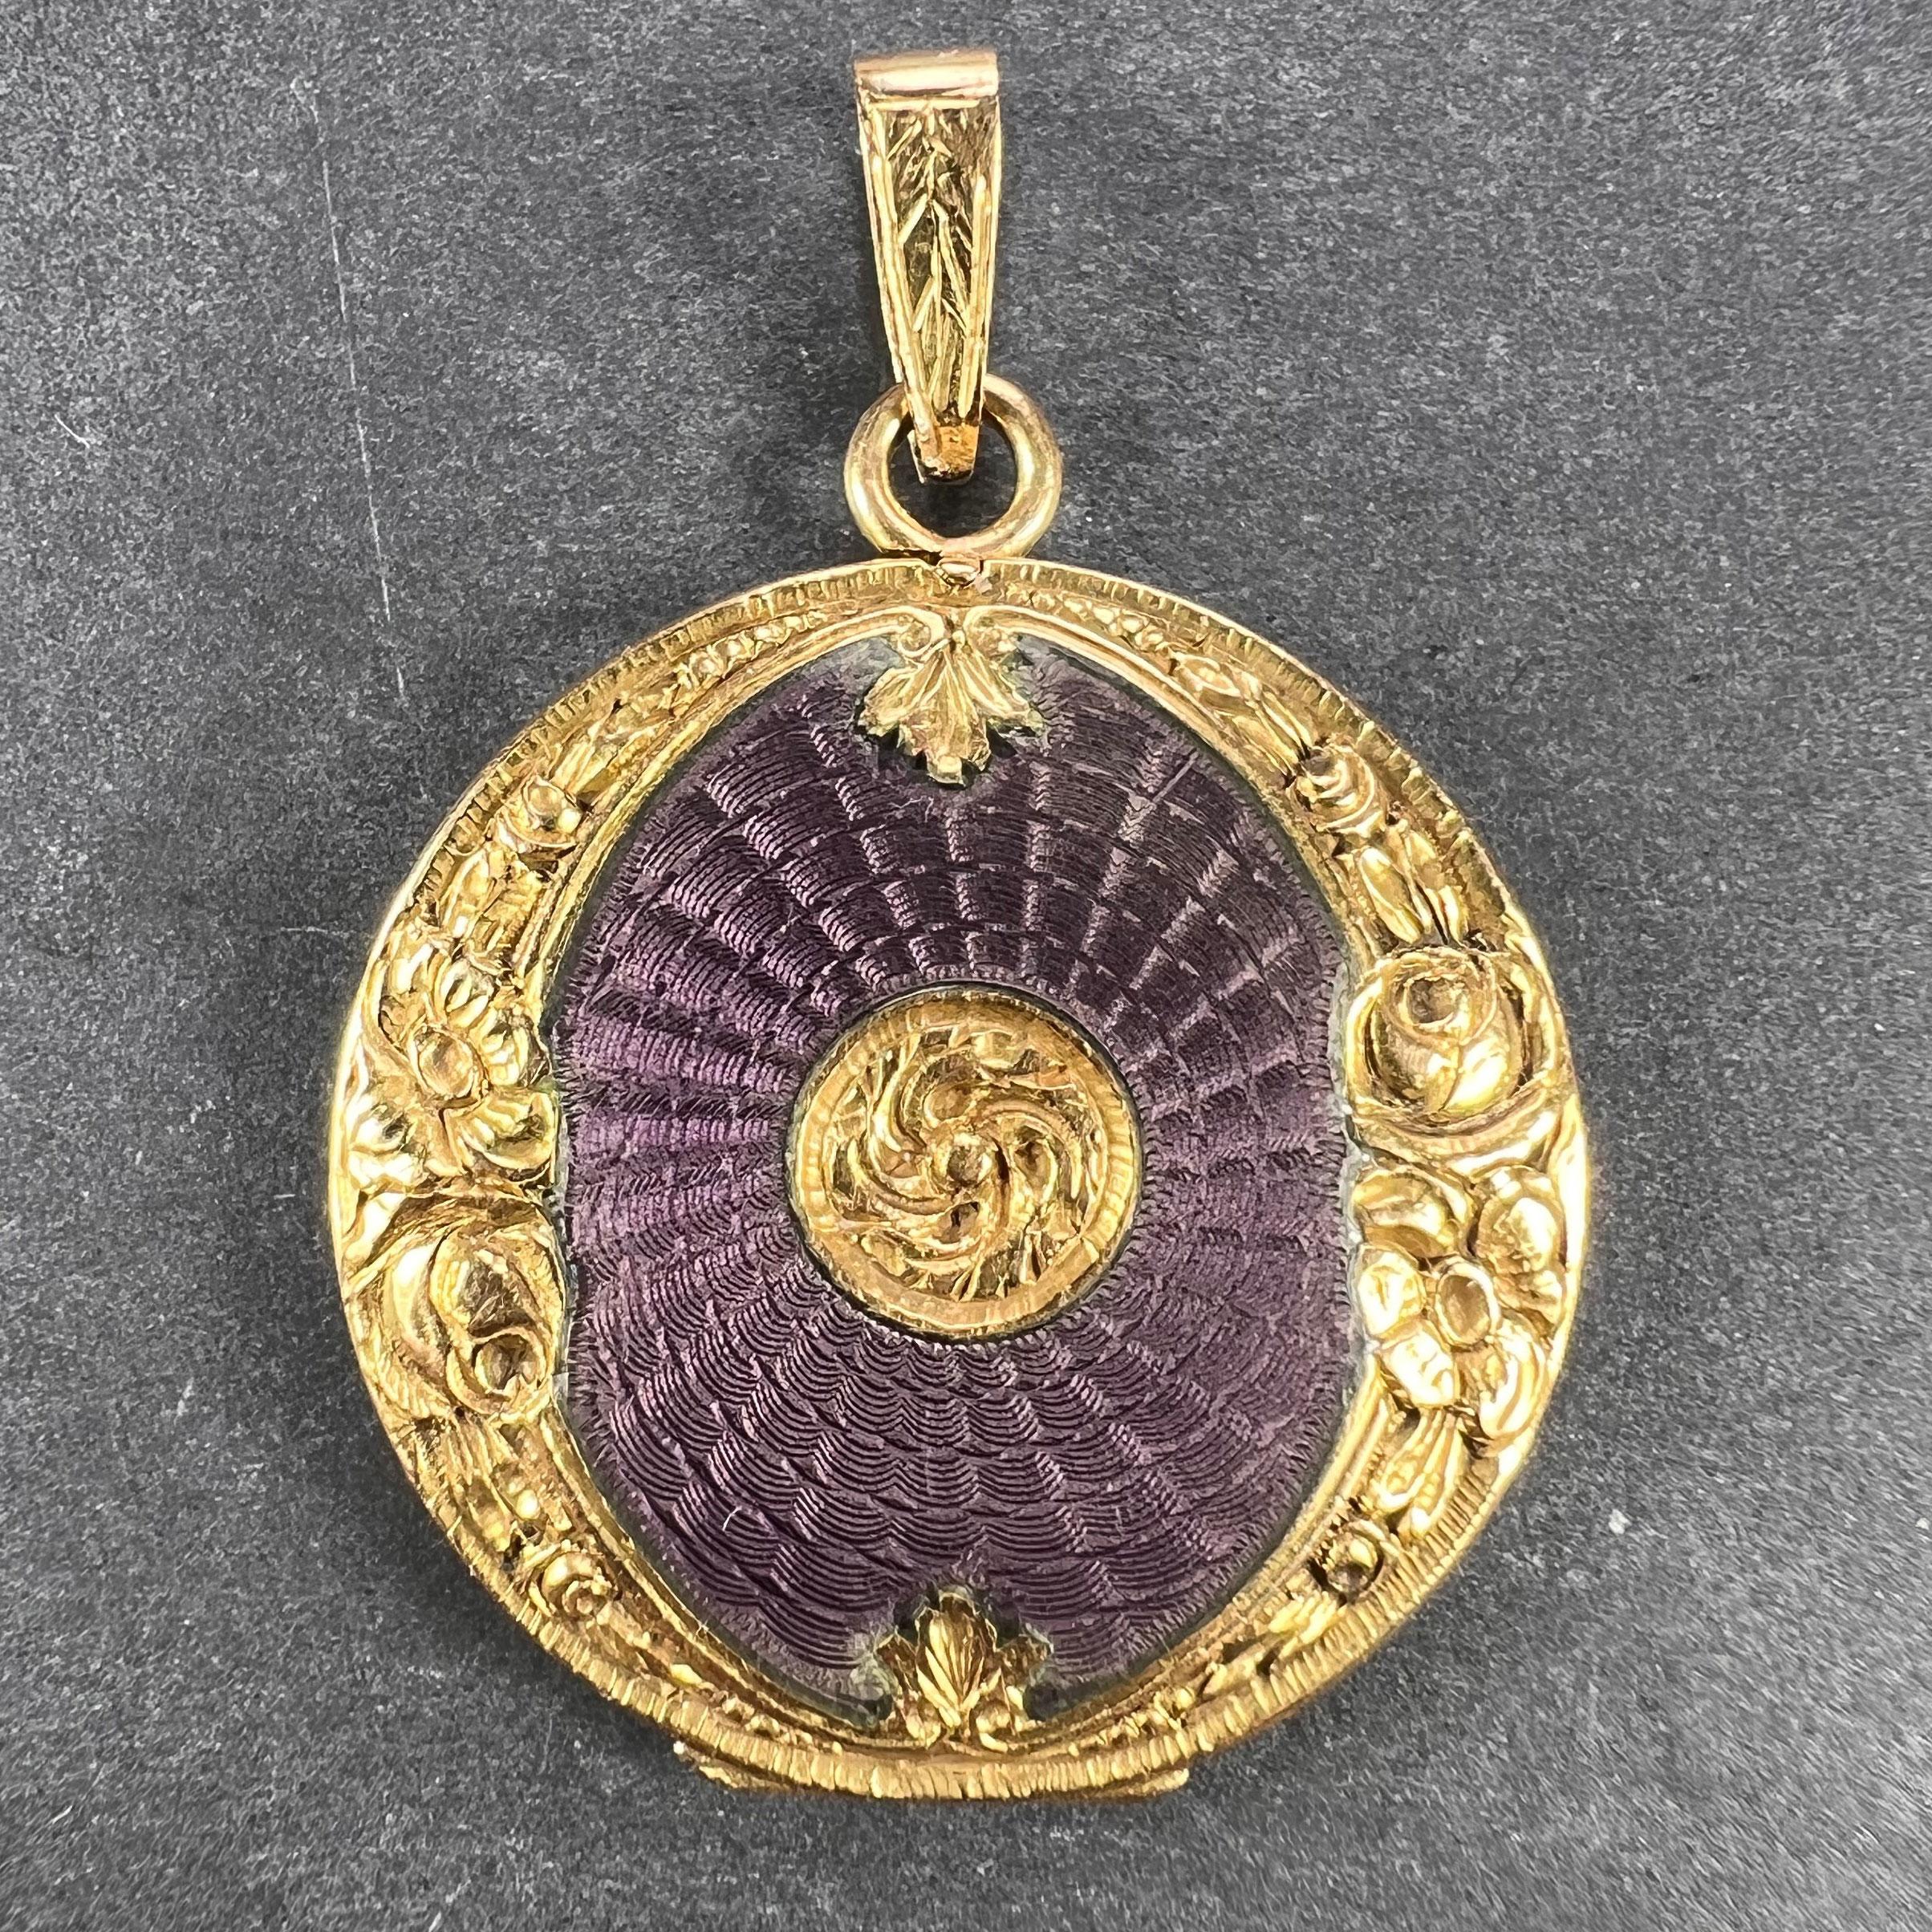 An 18 karat (18K) yellow gold pendant locket with purple guilloche enamel and a floral frame. Scratch numbered 028. Unmarked but tested as 18 karat gold.

Dimensions: 2.8 x 2.4 x 0.35 cm (not including jump ring)
Weight: 5.99  grams
